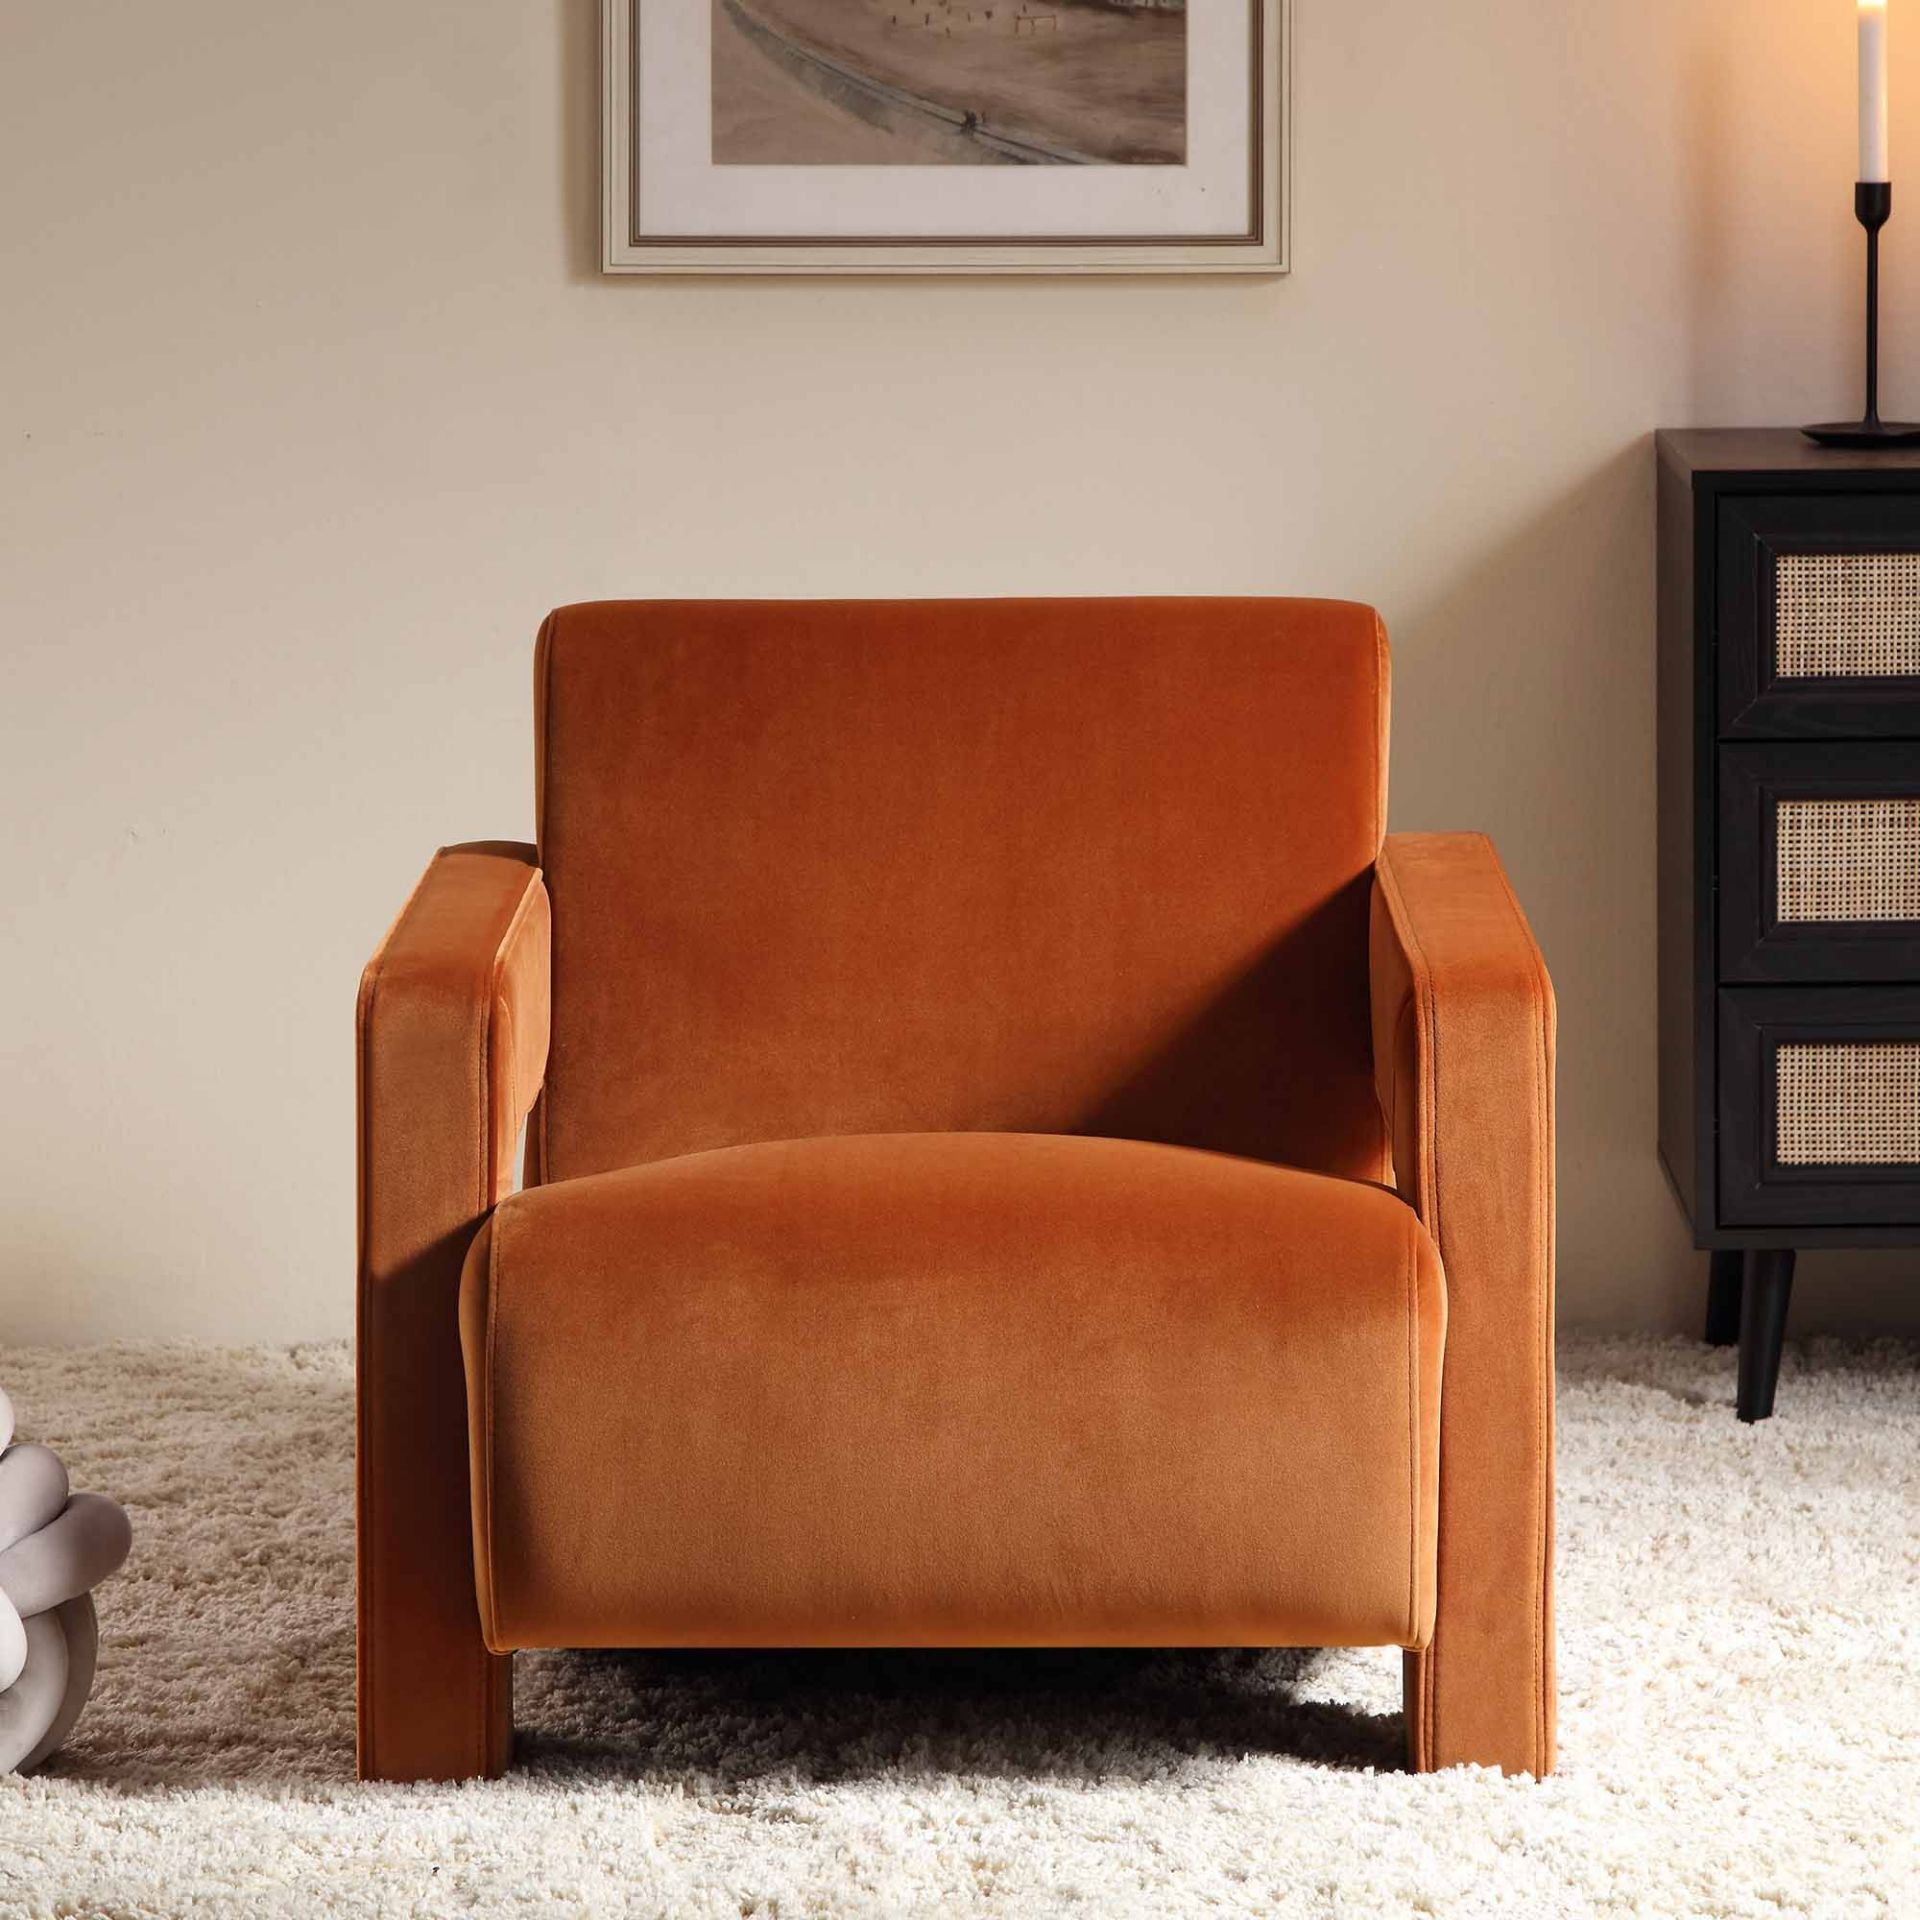 Brompton Sculptural Armchair, Rust Velvet. - R14. RRP £319.99. The deep, slightly sloped seat and